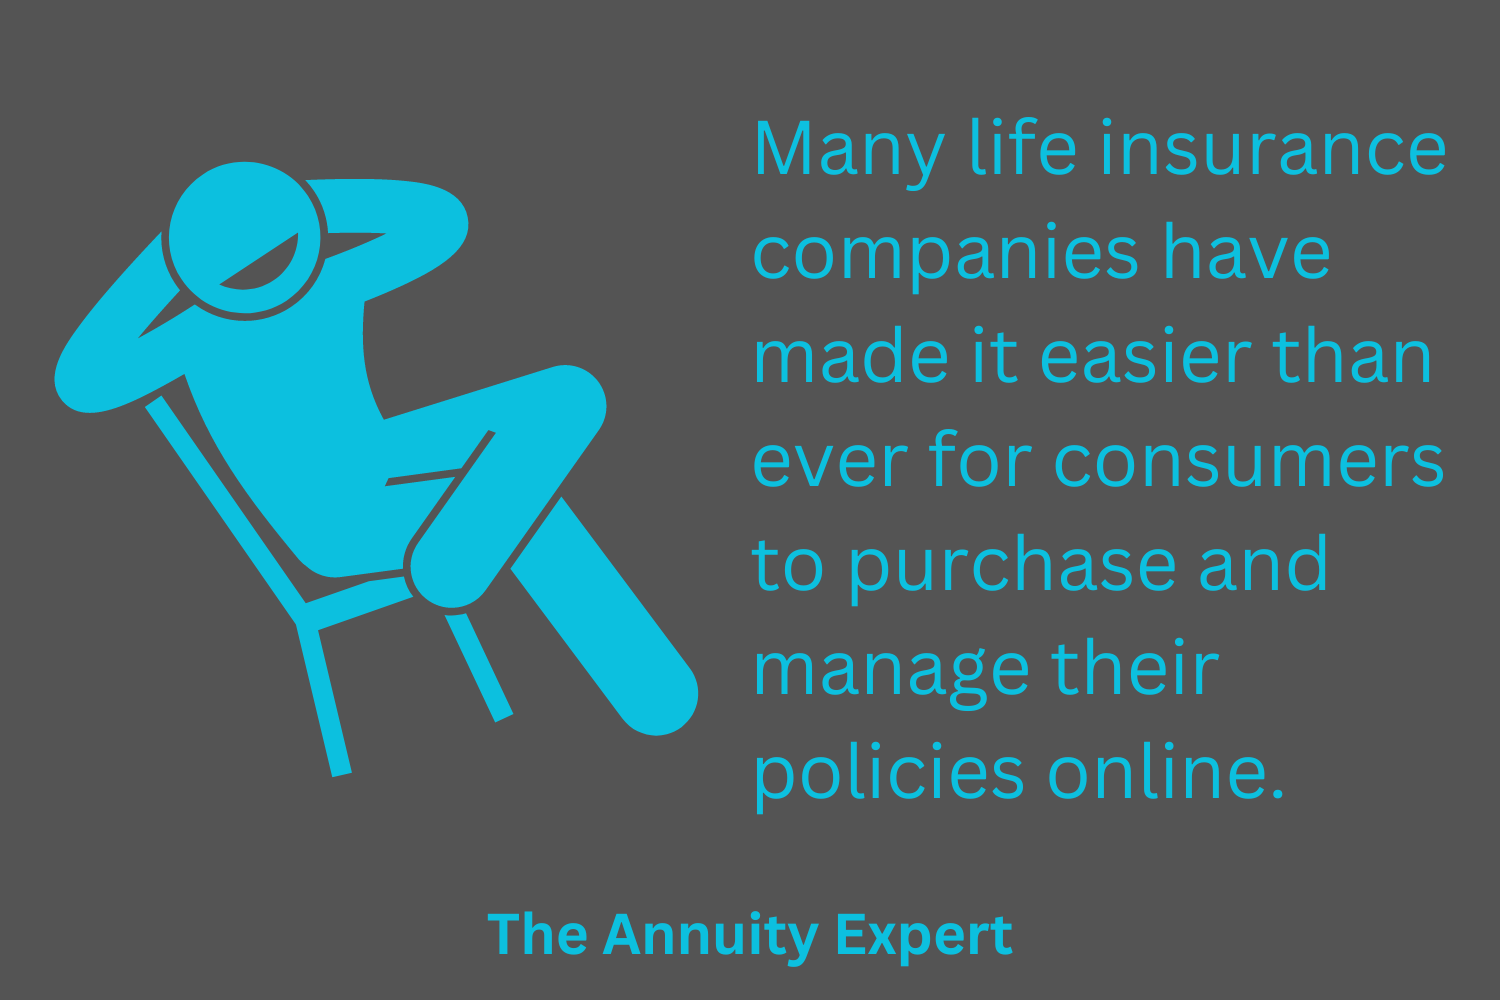 Can You Buy A Life Insurance Policy Completely Online?